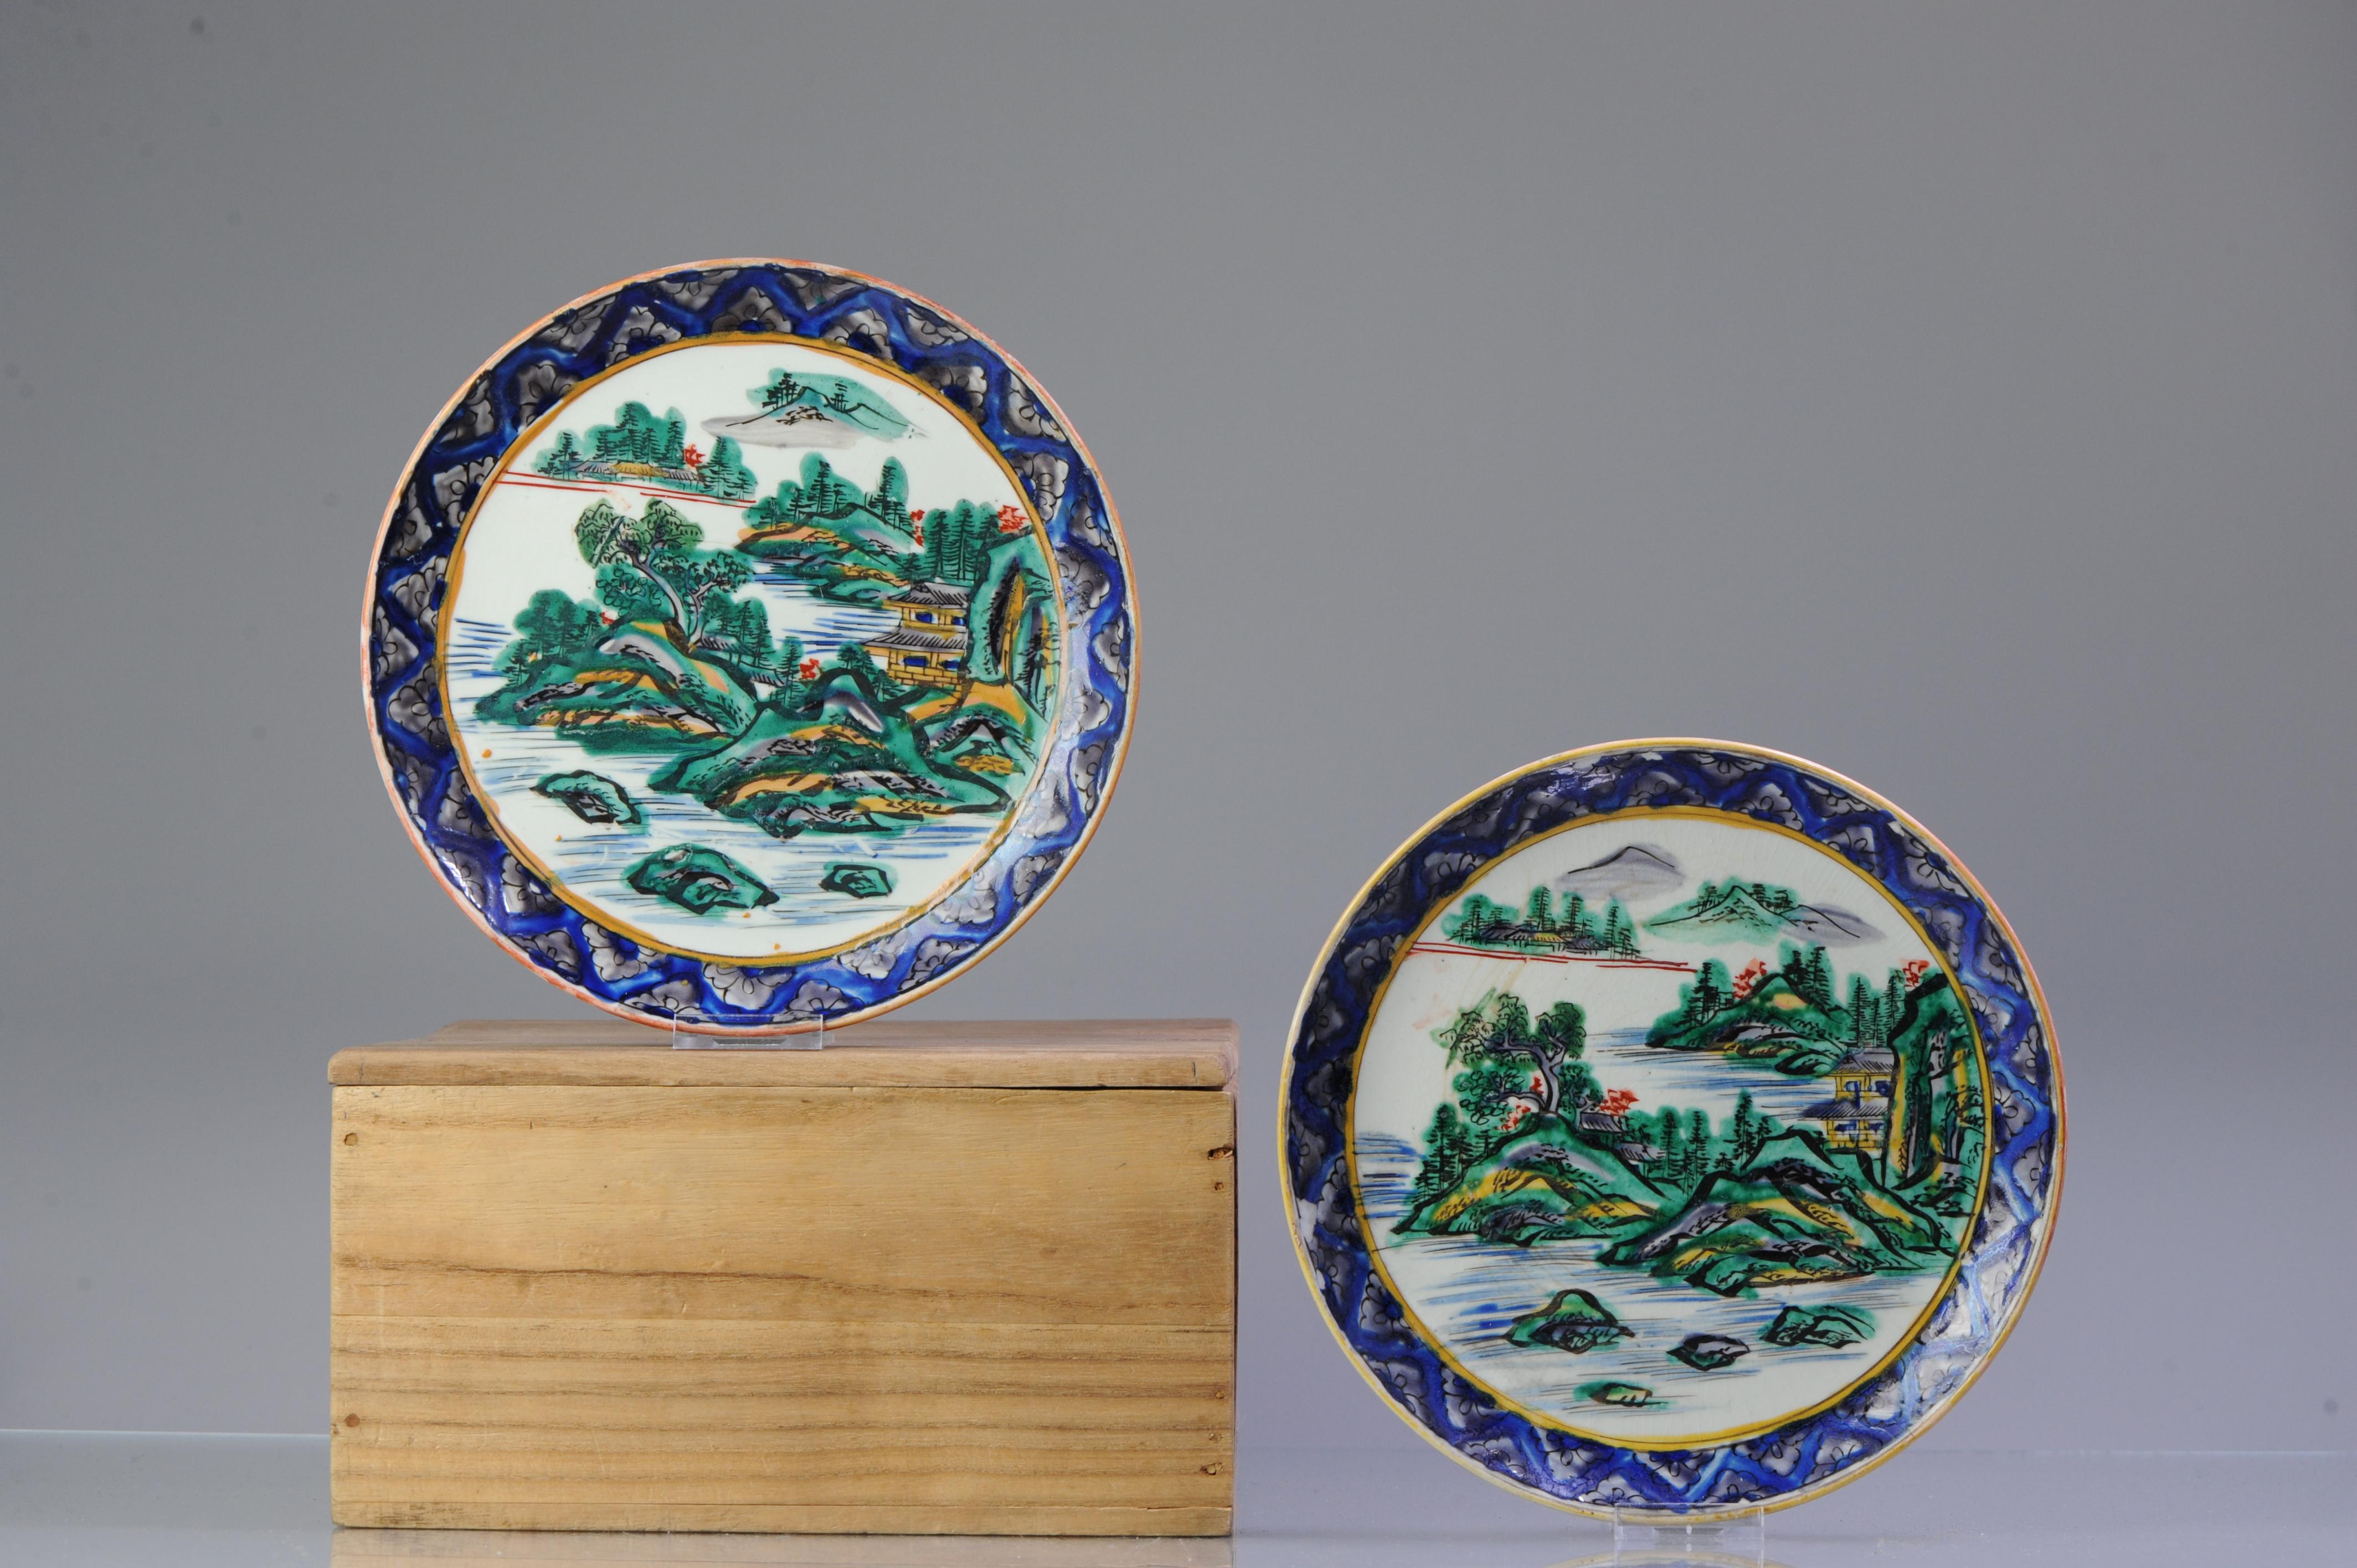 Description

A very nice set of polychrome dishes with green and blue overglaze colors. Interesting decoration

Box included.

Condition
Both with crackle lines and some enamel loss only. Size 217 x 25mm D X H

Period
18th century
19th